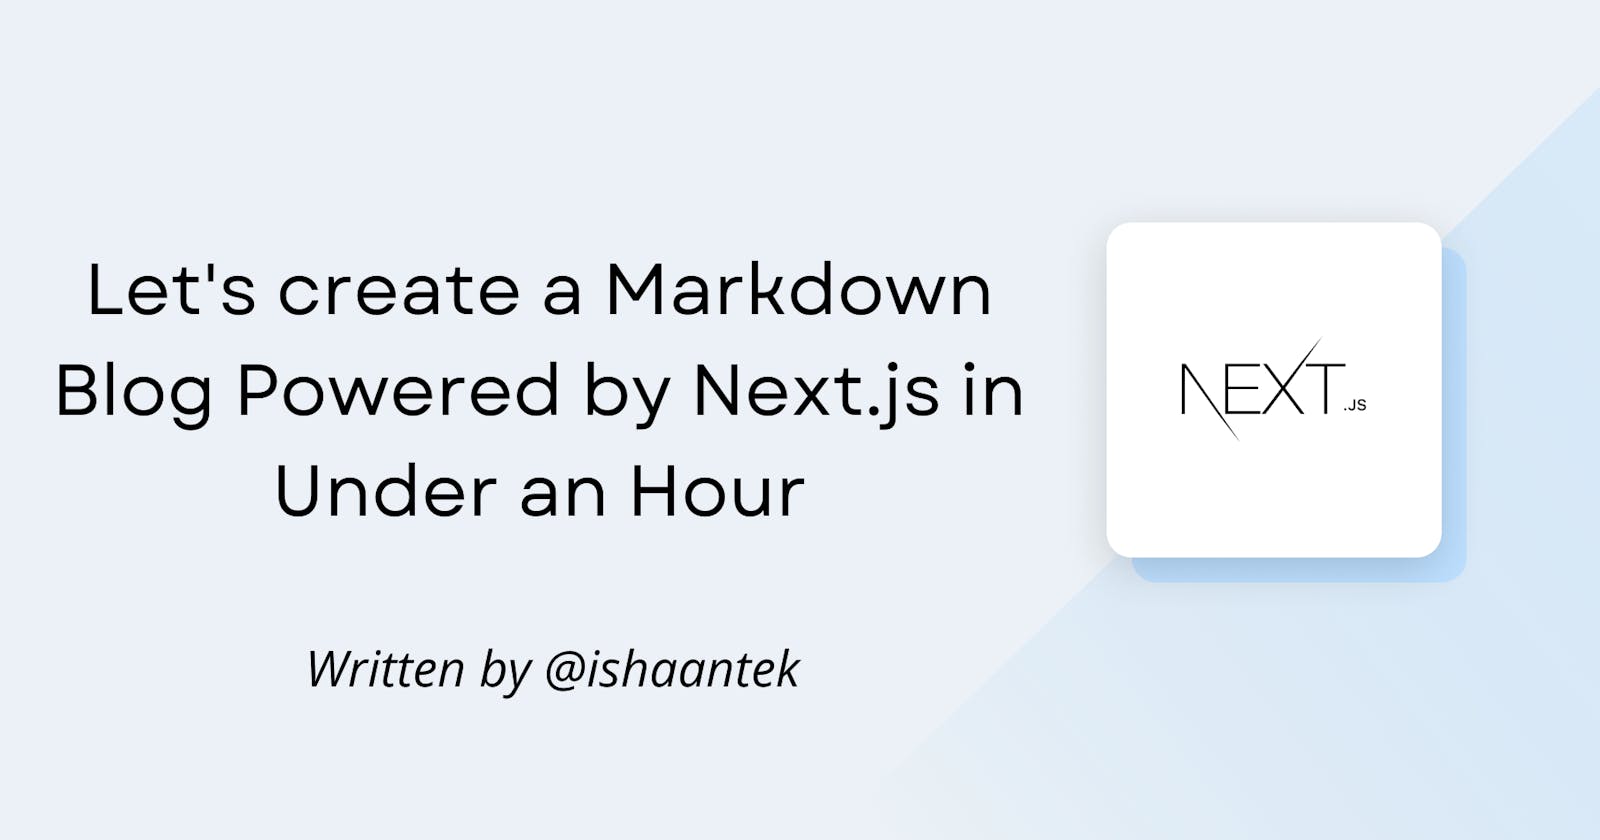 Let's Create a Markdown Blog Powered by Next.js in Under an Hour